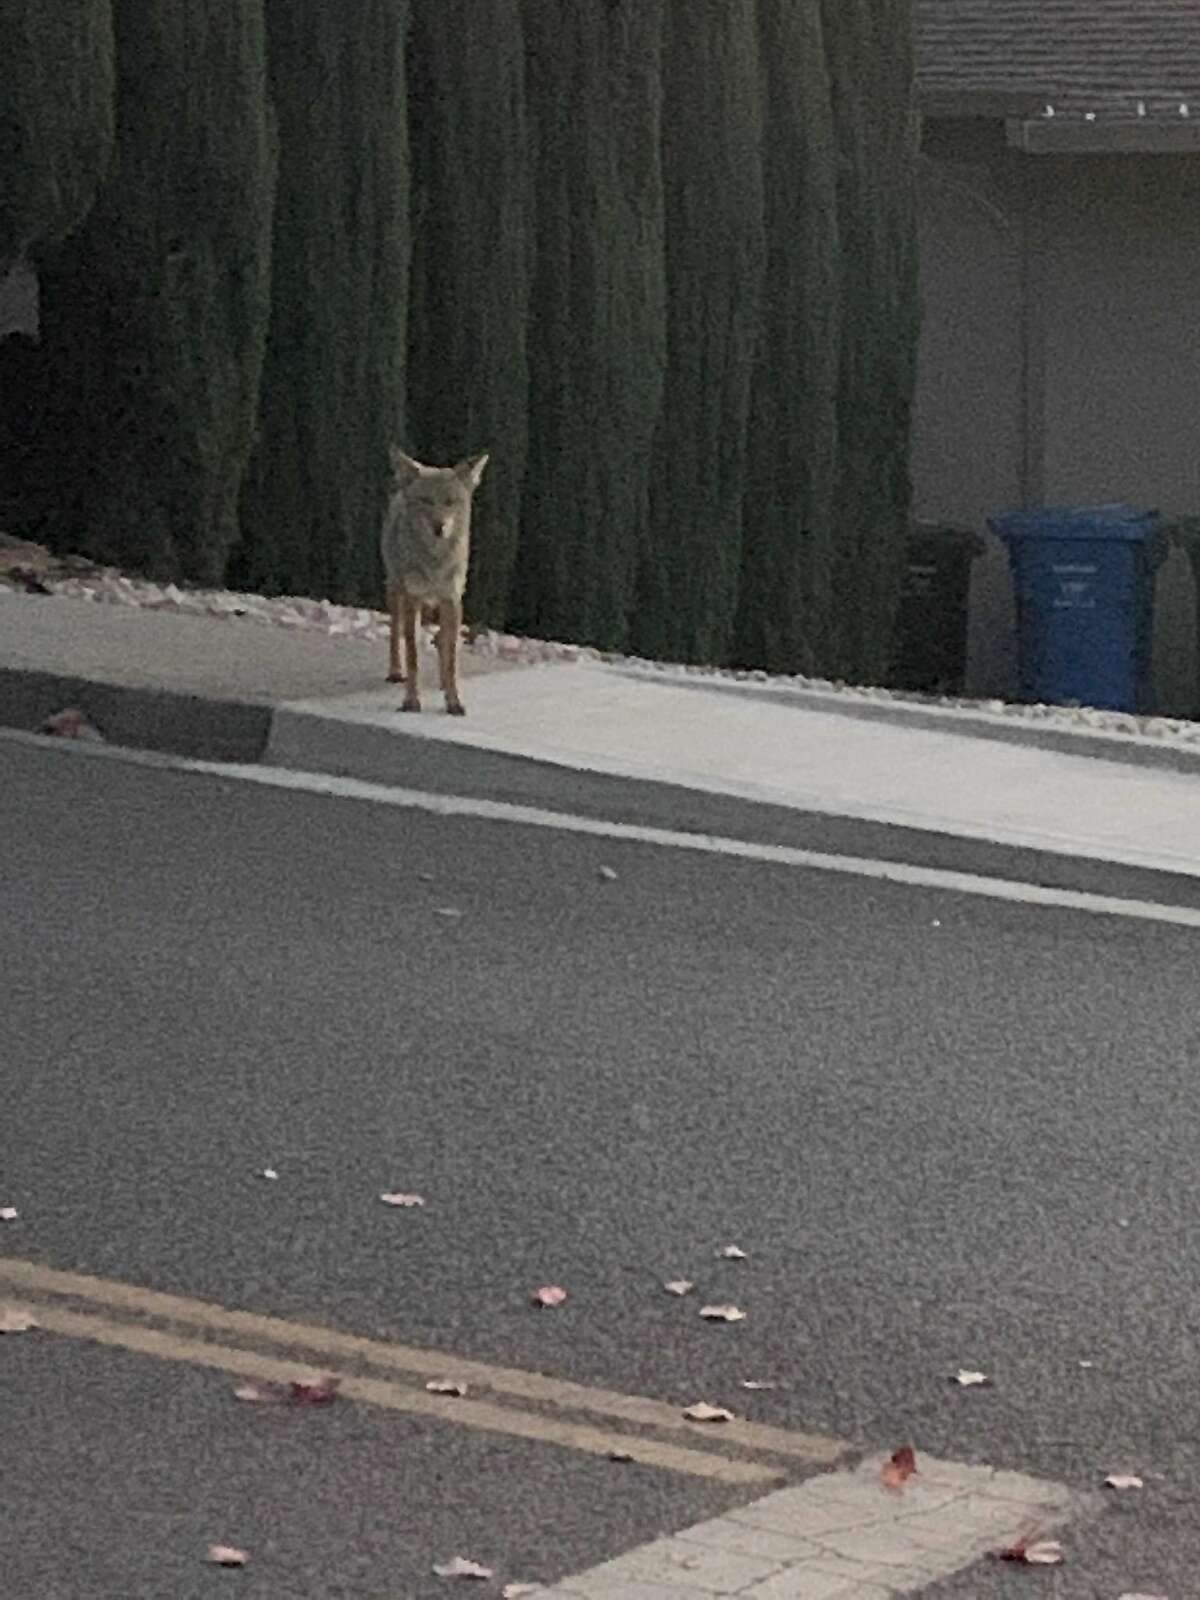 About 15 minutes after the Campolindo High attack on Dec. 4, a woman in the area said she was stalked by a coyote as she walked near the school.